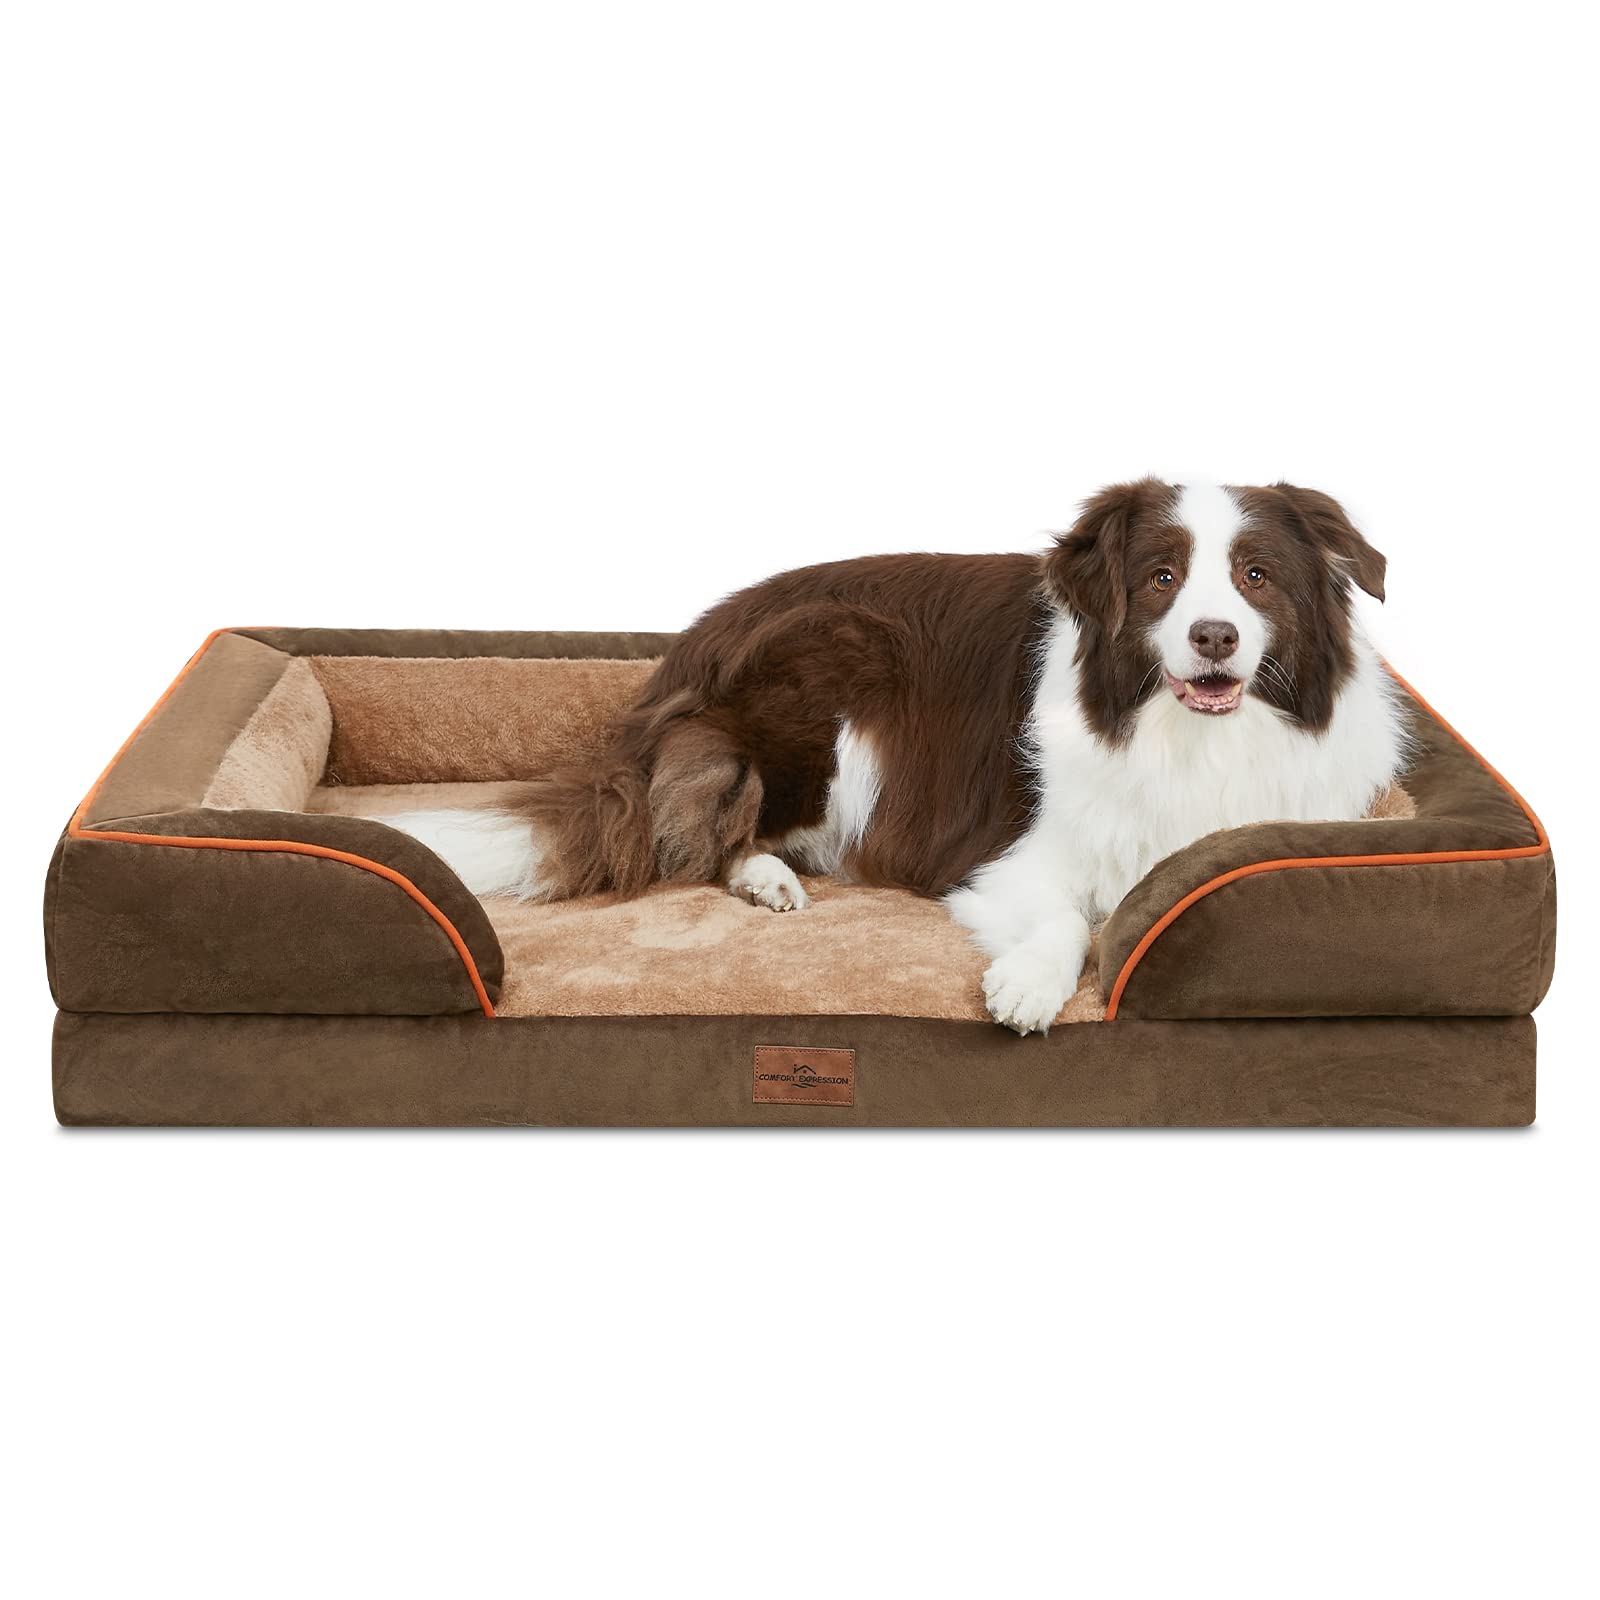 Comfort Expression XL Dog Beds for Extra Large Dogs, XL Dog Bed, Large Dog Bed Washable, Jumbo Dog Bed with Removable Cover and 